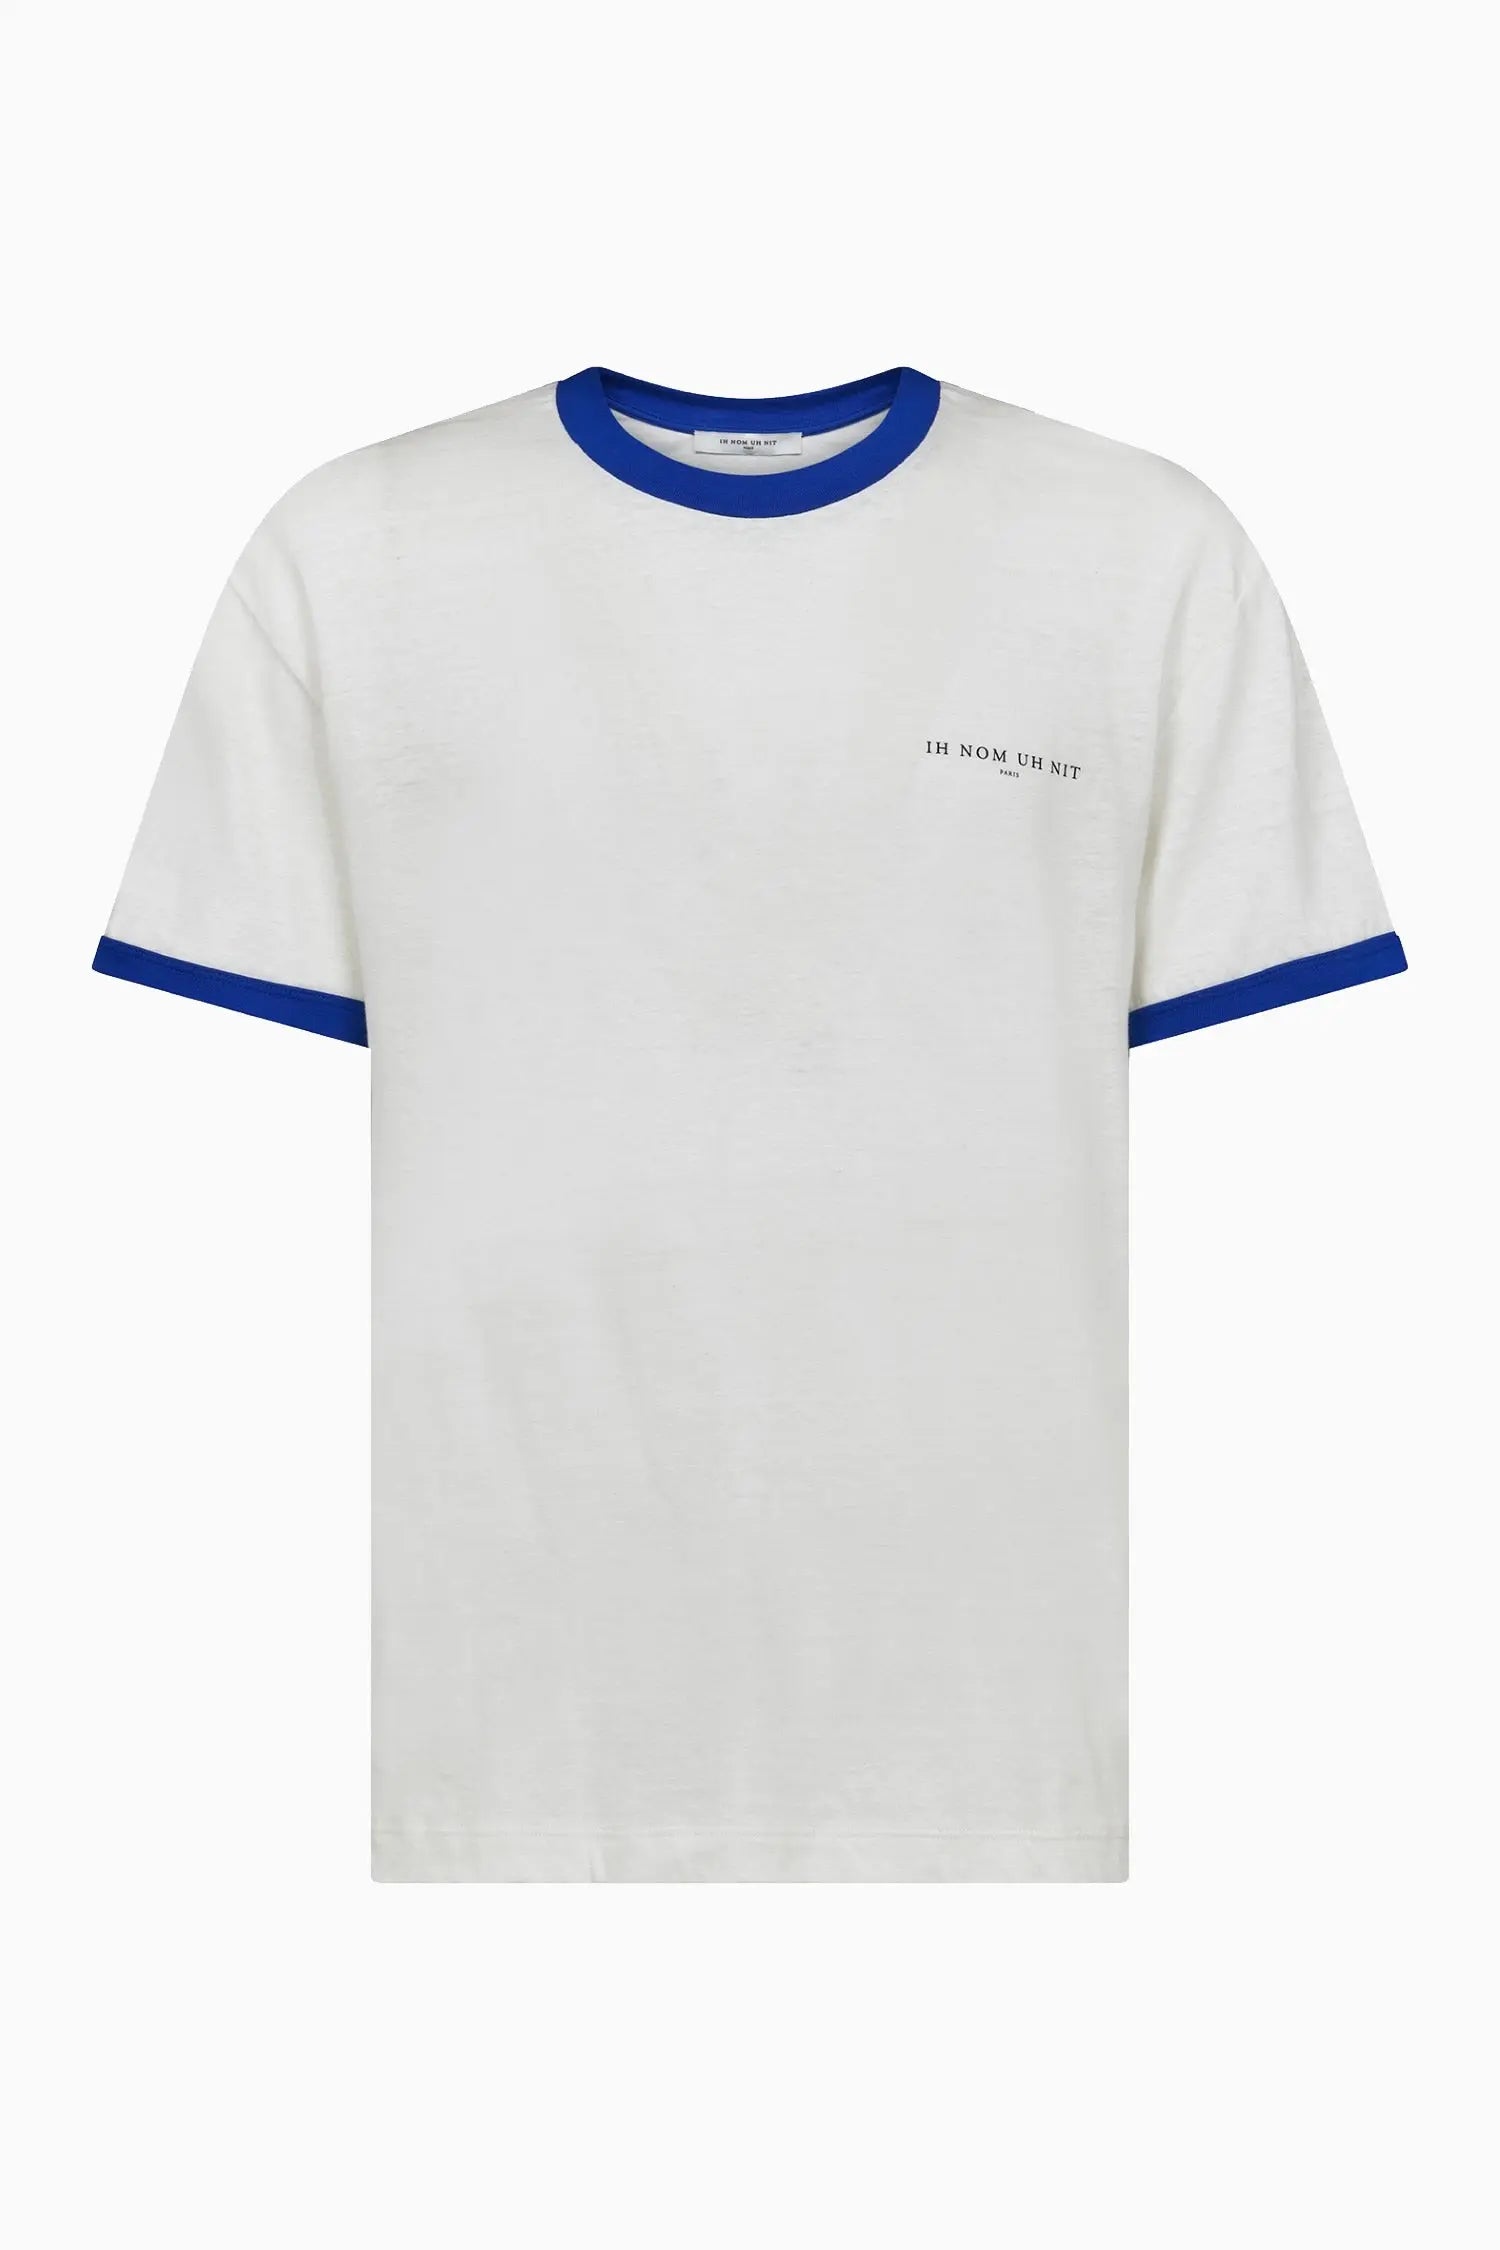 Two colored T-shirt with logo - IH NOM UH NIT